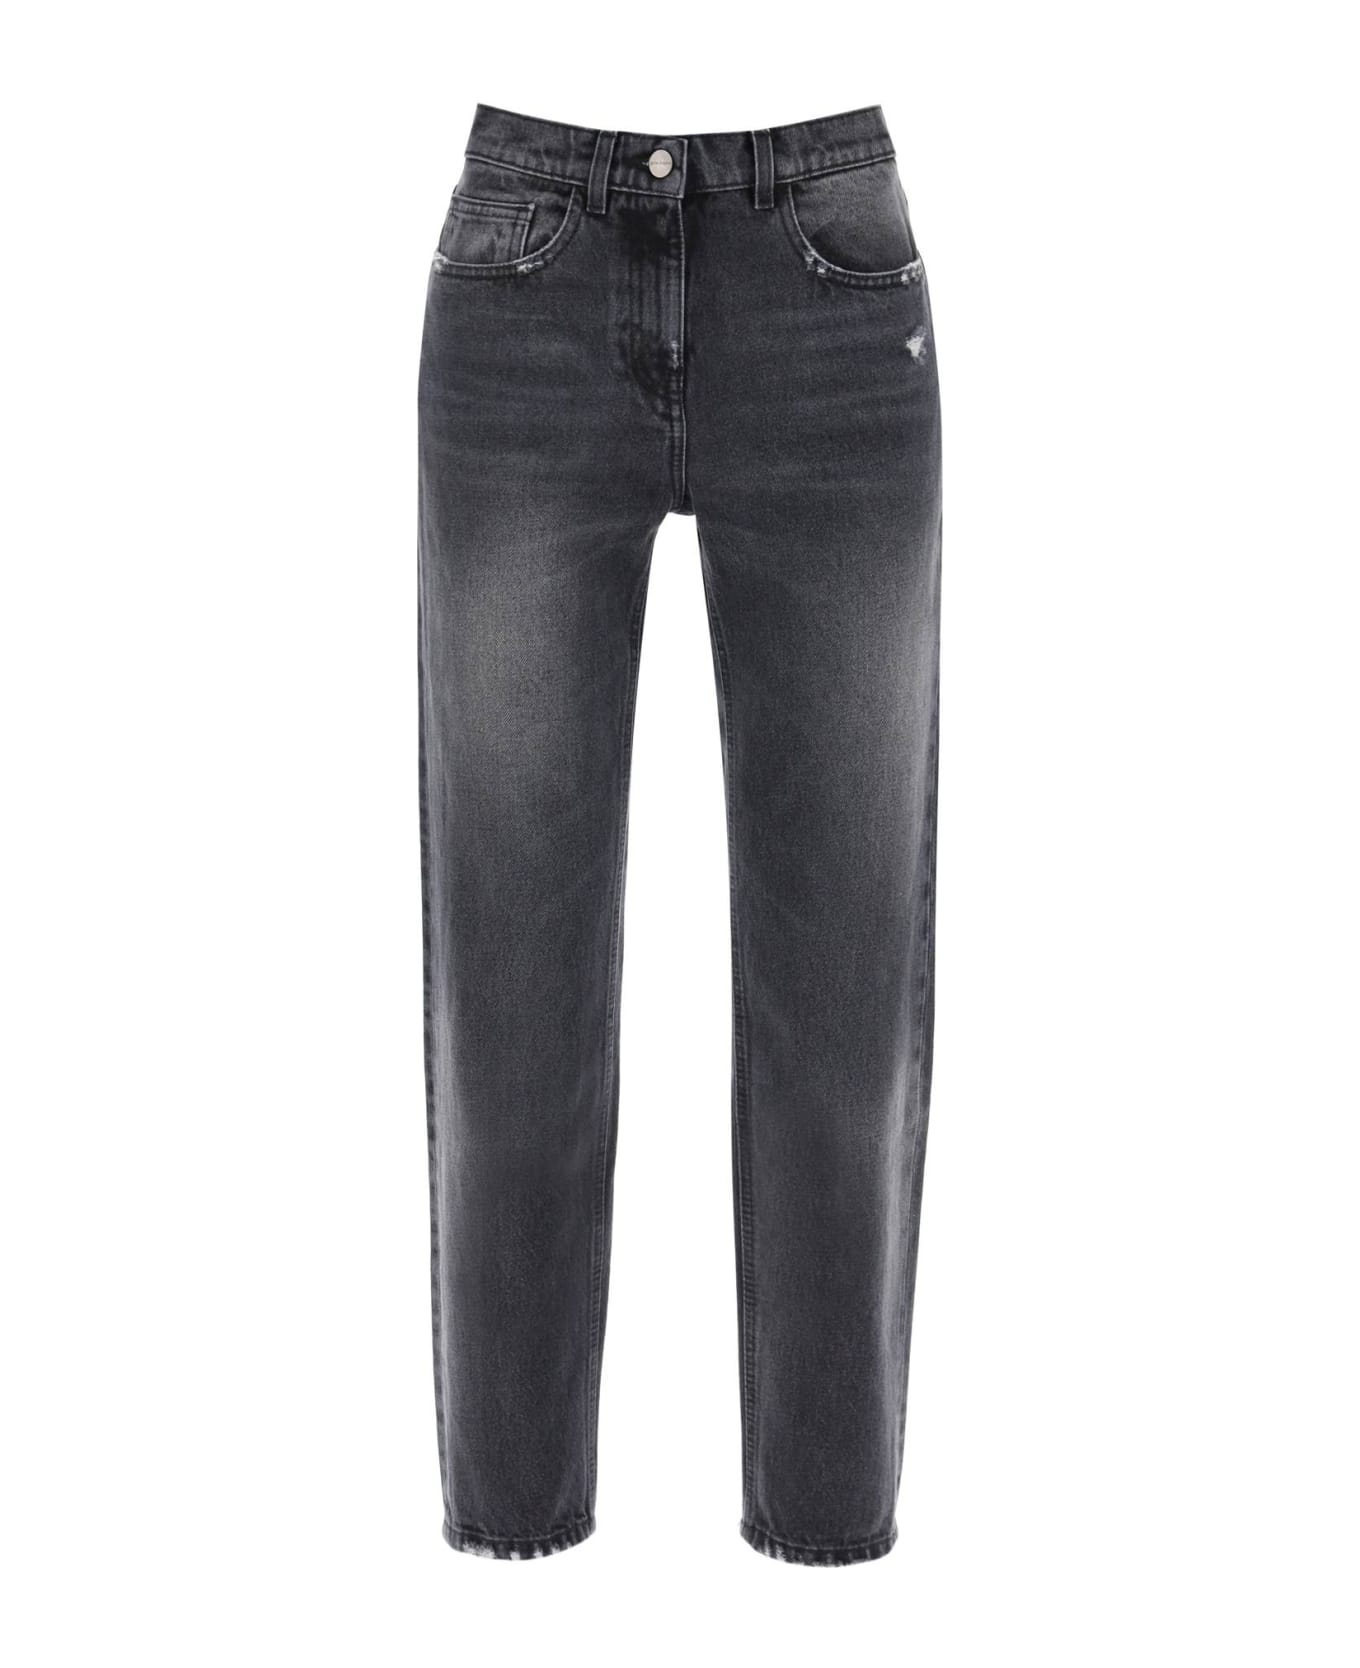 Palm Angels Straight Cut Jeans - BLACK BROWN (Grey)